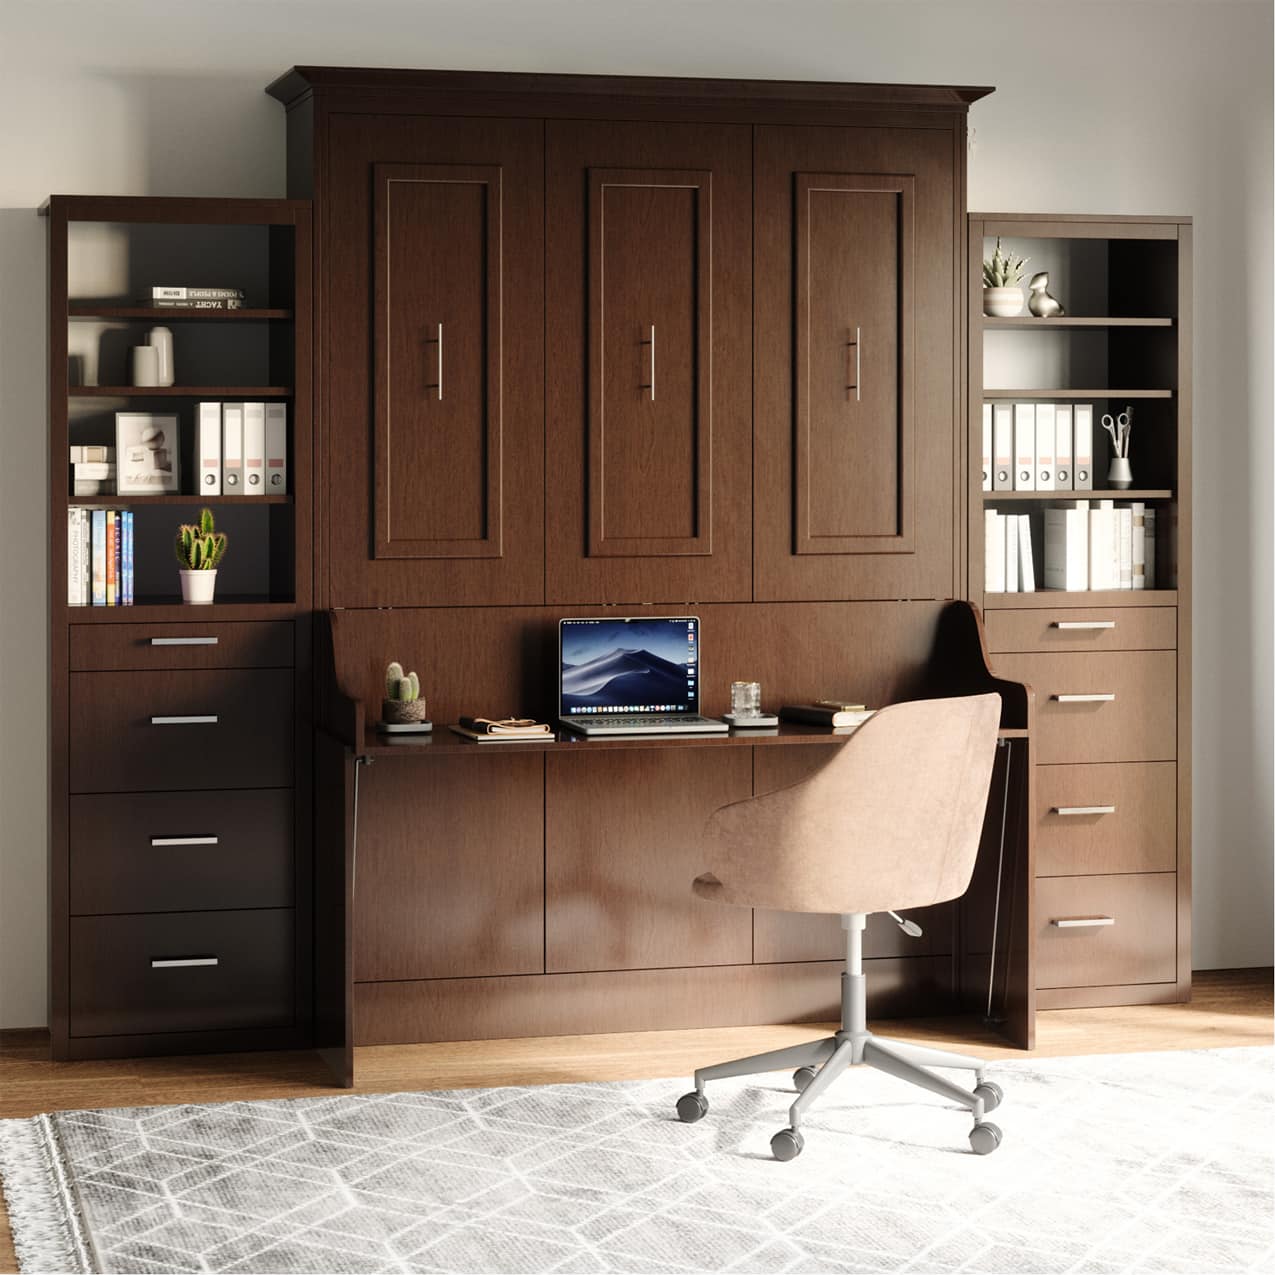 coventry queen murphy bed with desk and storage cabinets bed closed hidden hideaway hide away hide-a-way diy murphy bed kit fold out pull down wall bed cabinet desk bed combo home office guest bed customizable storage adjustable shelves pullout nightstand drawers